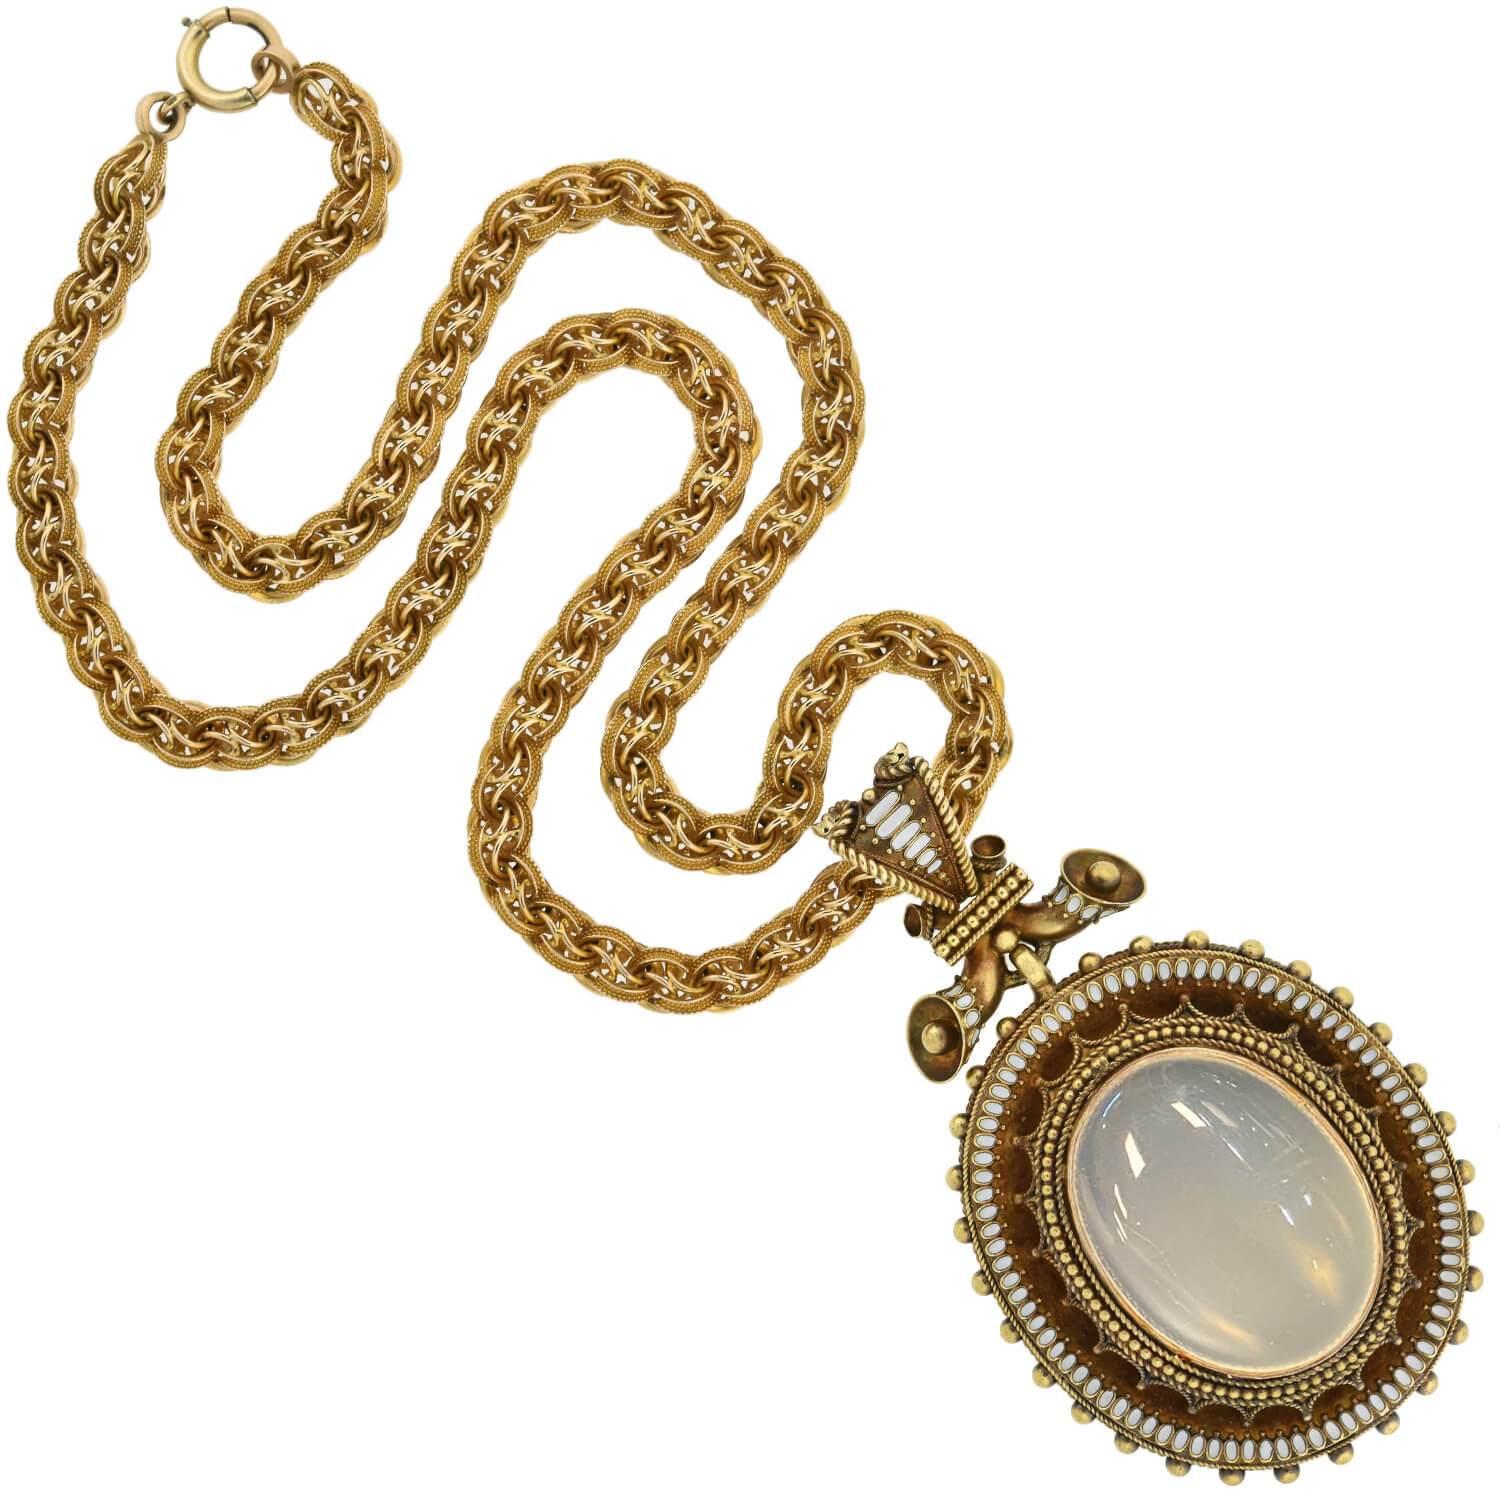 An absolutely magnificent moonstone pendant necklace from the Victorian (ca1880s) era! This incredible piece is comprised of a fantastic 18kt yellow gold pendant, which hangs from an ornate 14kt gold chain. The oval-shaped pendant is particularly